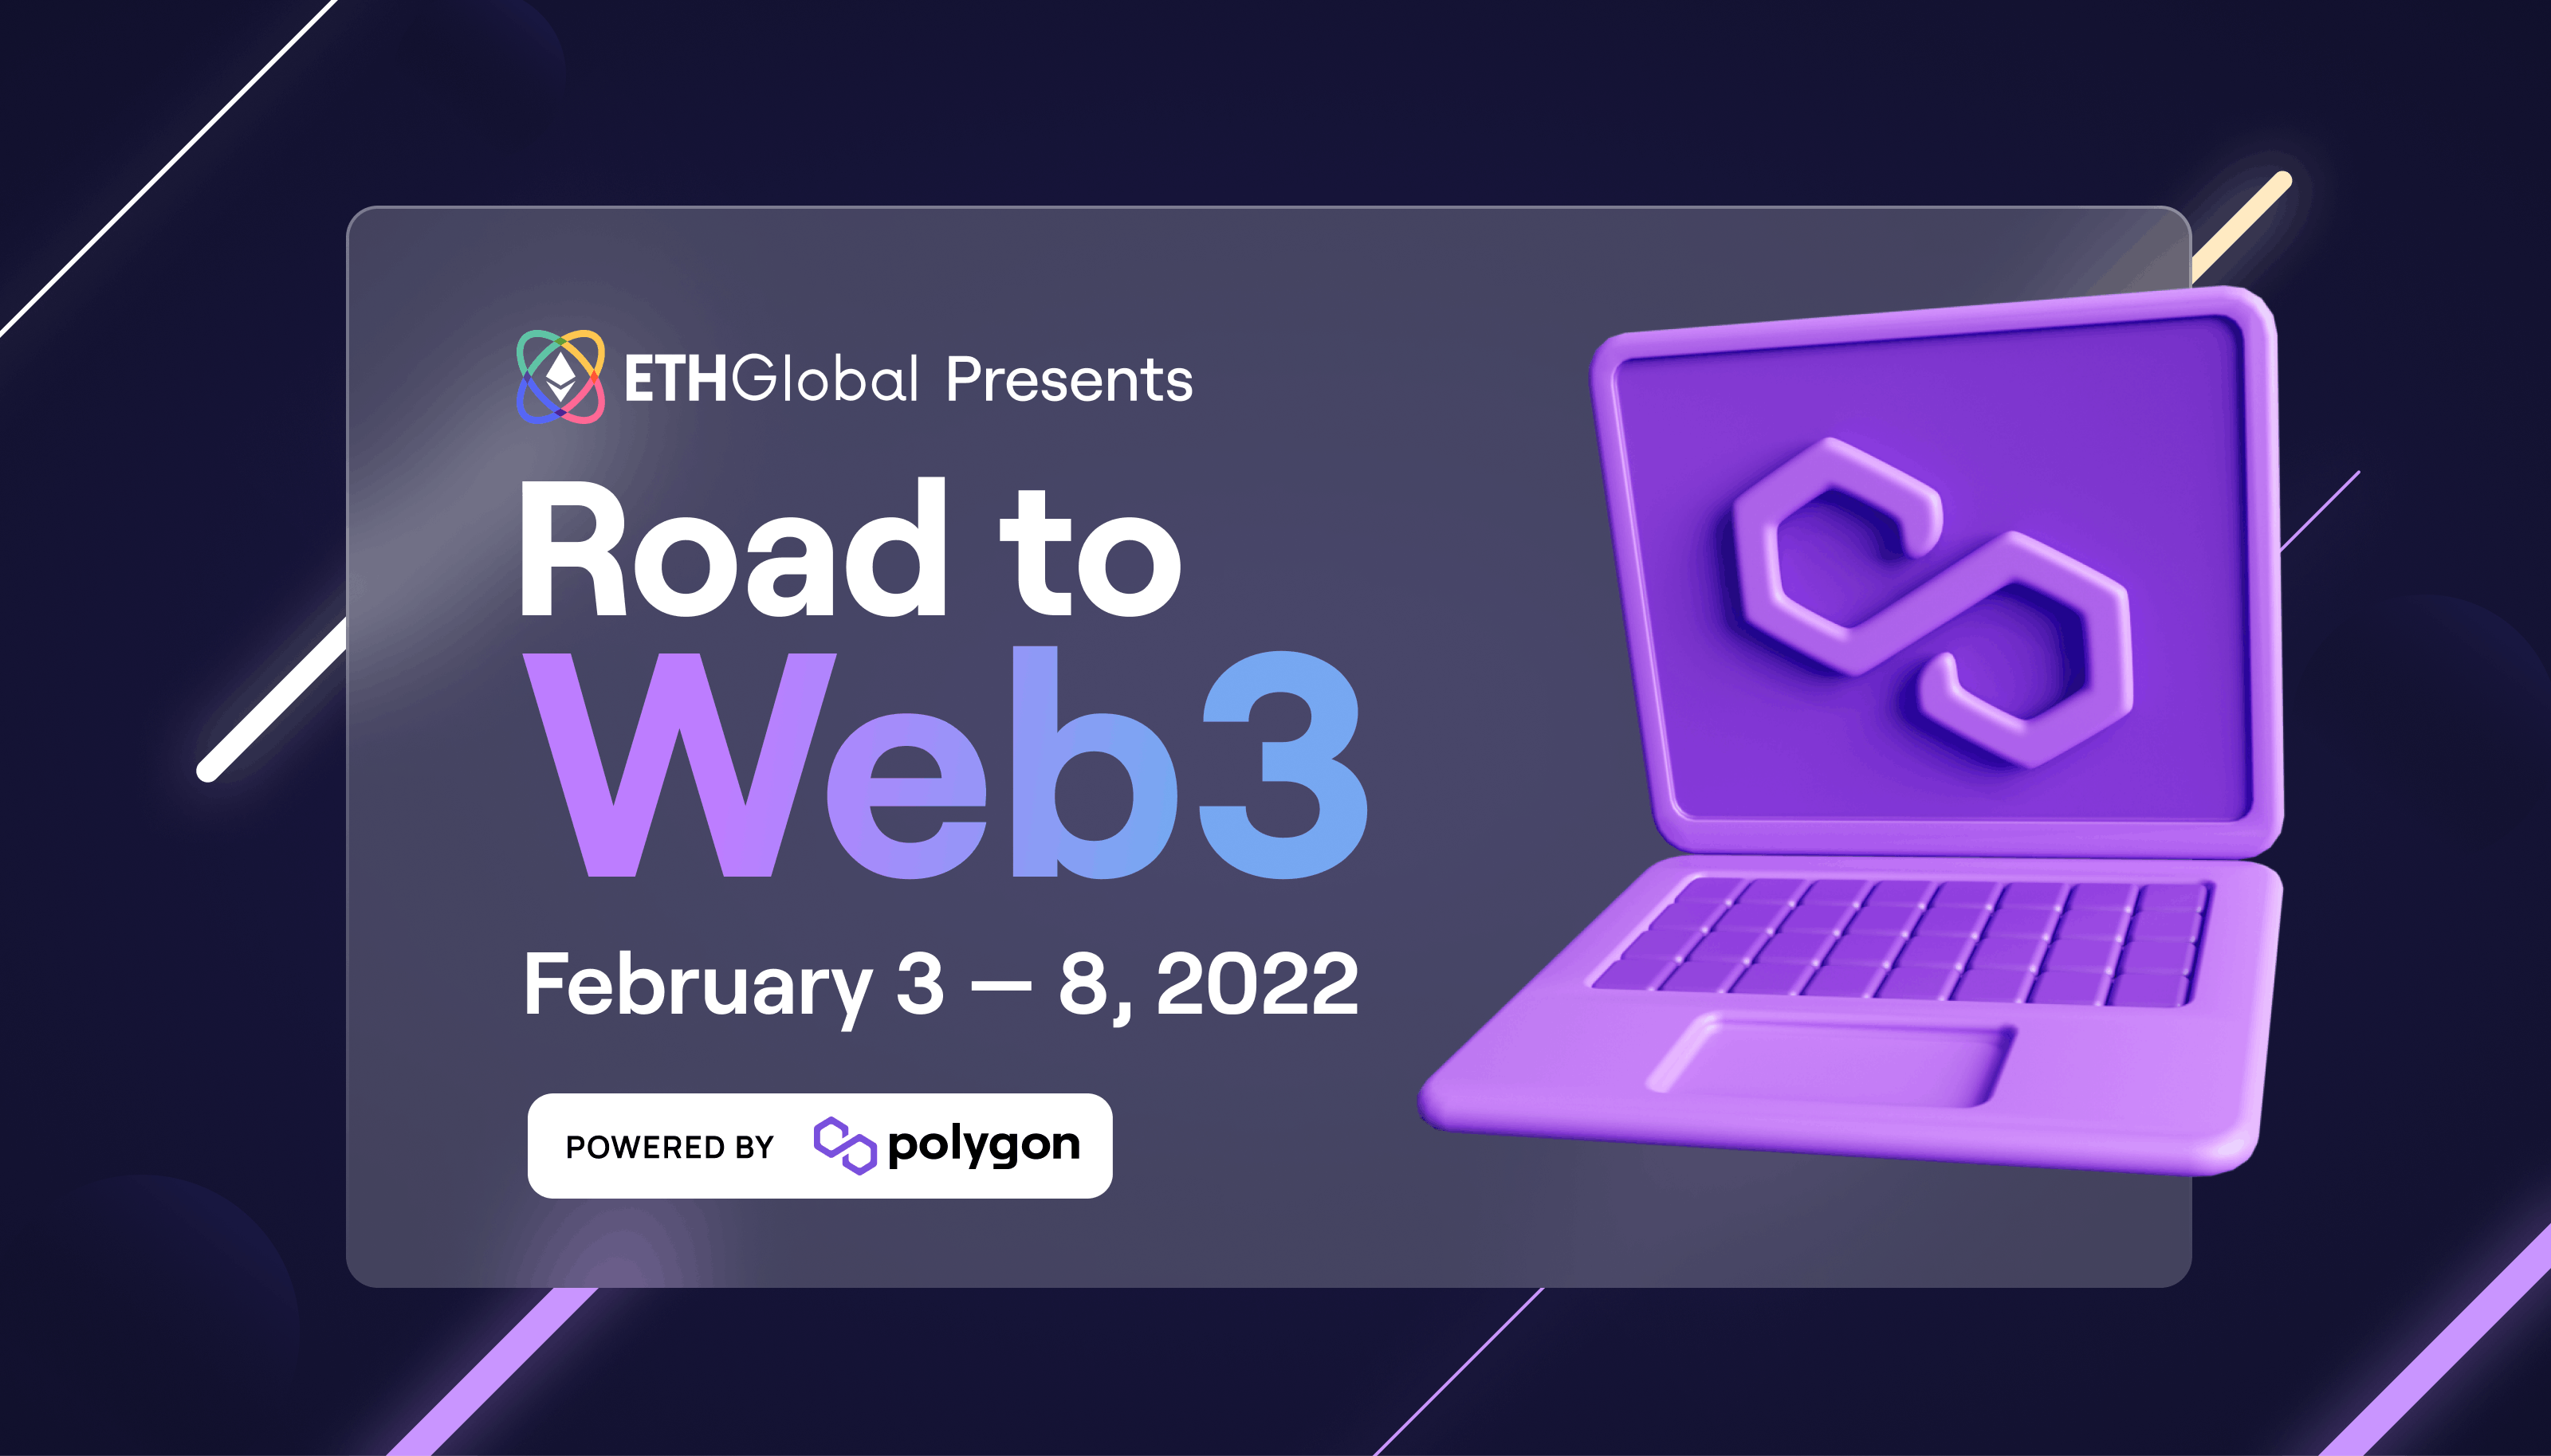 featured image - Introducing the Road to Web3 Hackathon Powered by Polygon